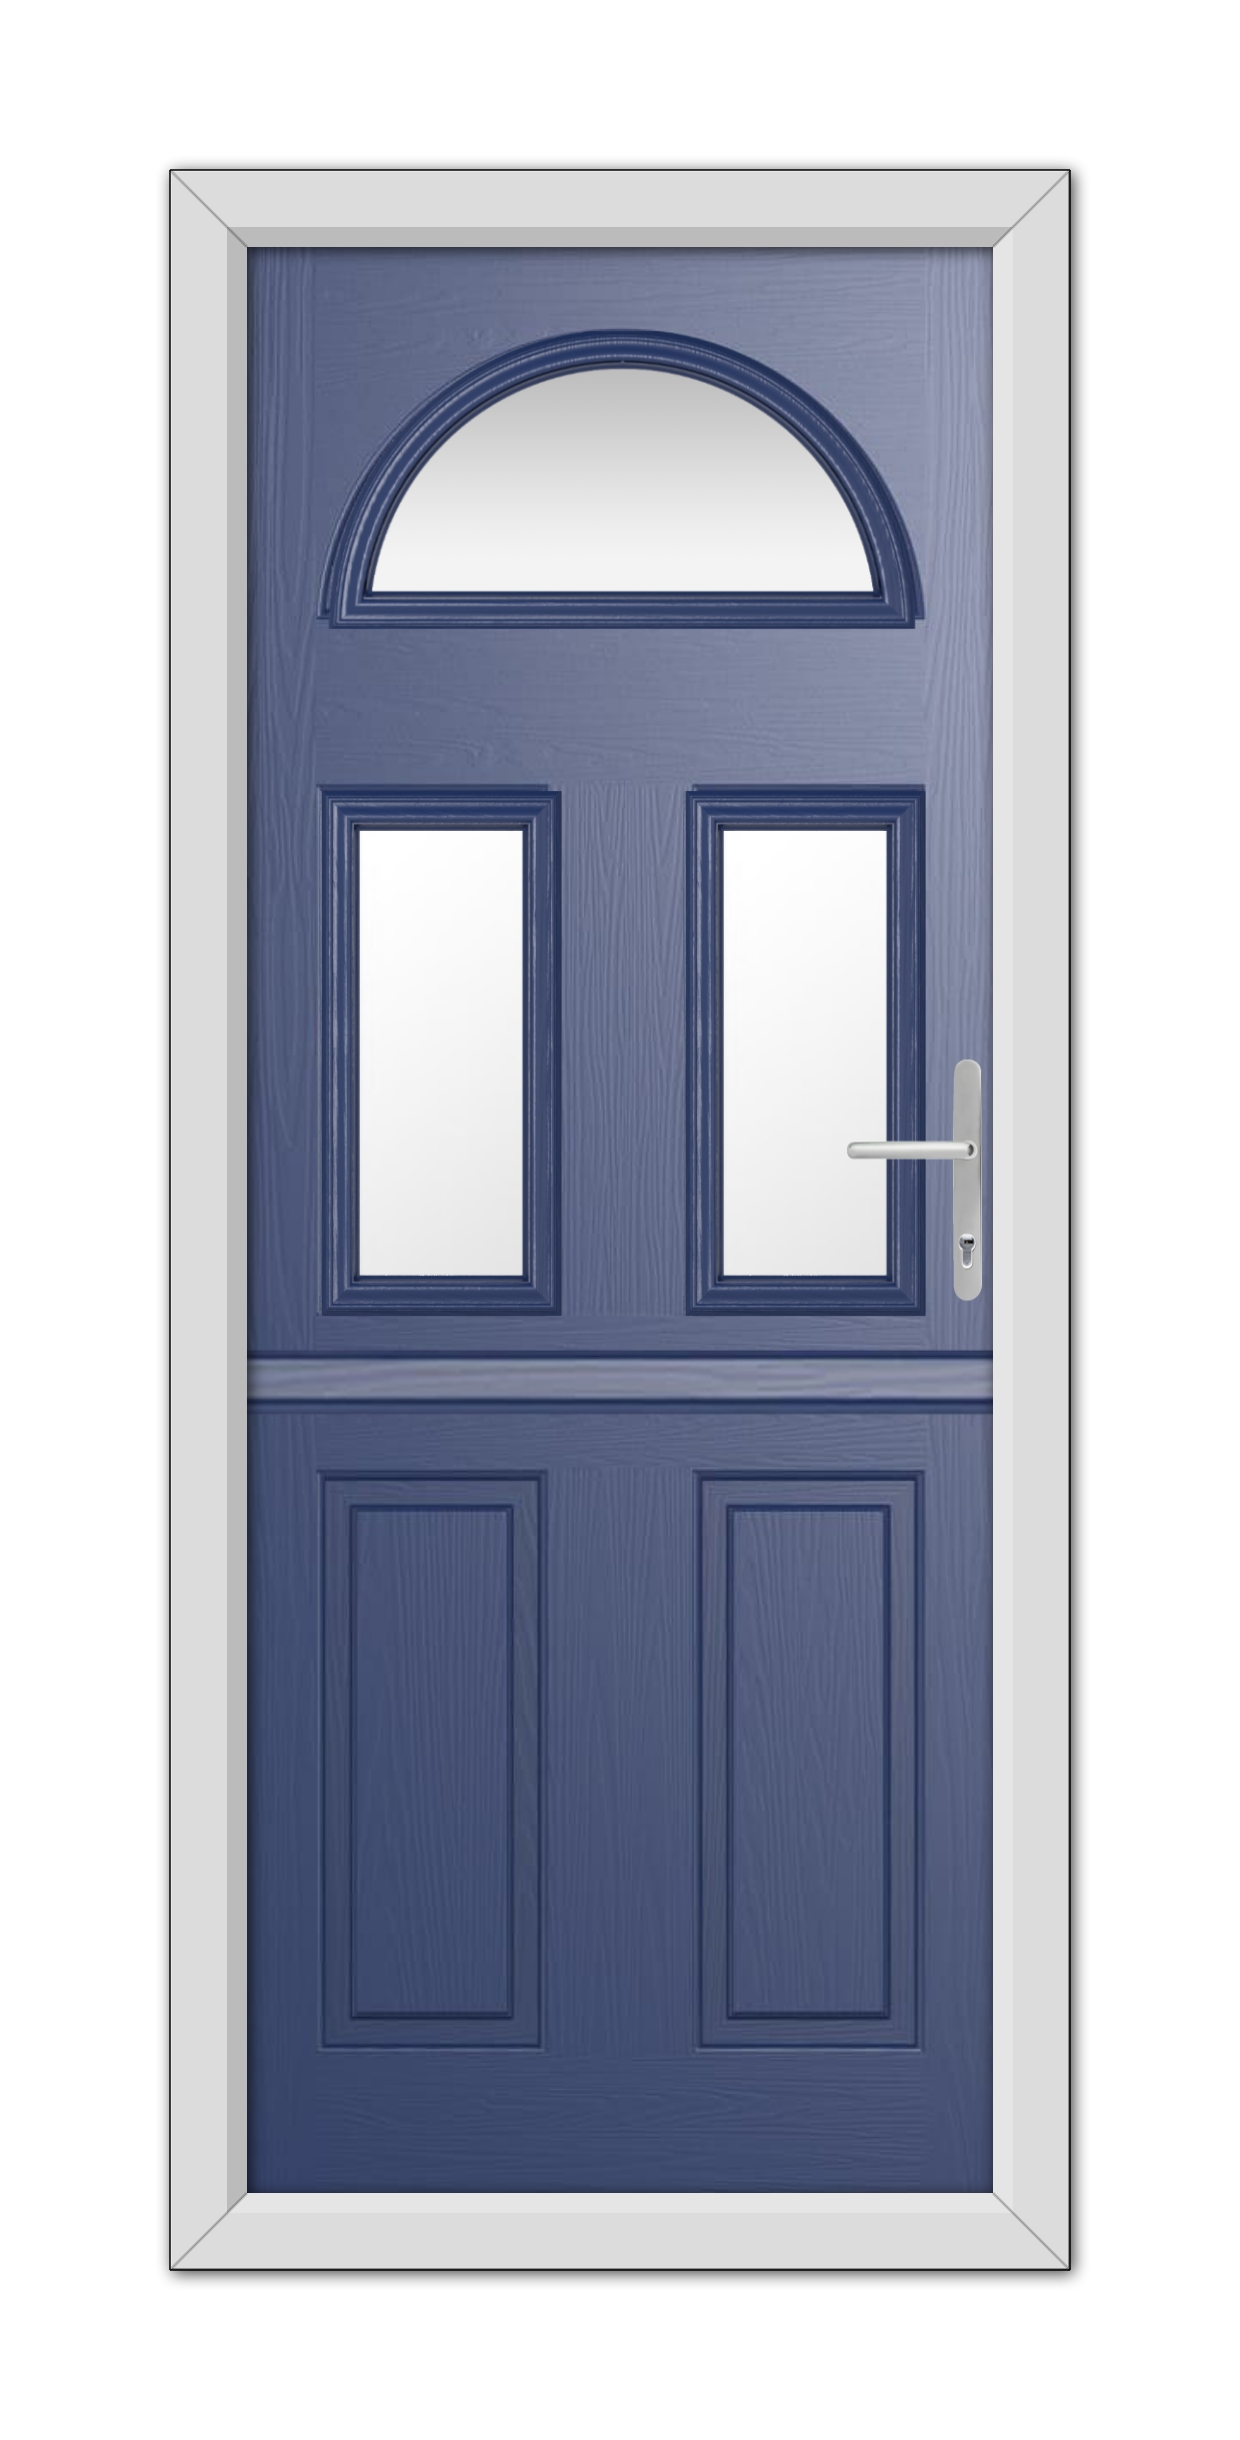 A Blue Winslow 3 Stable Composite Door 48mm Timber Core with white trim, rectangular and arched window panels, and a modern handle, set in a white door frame.